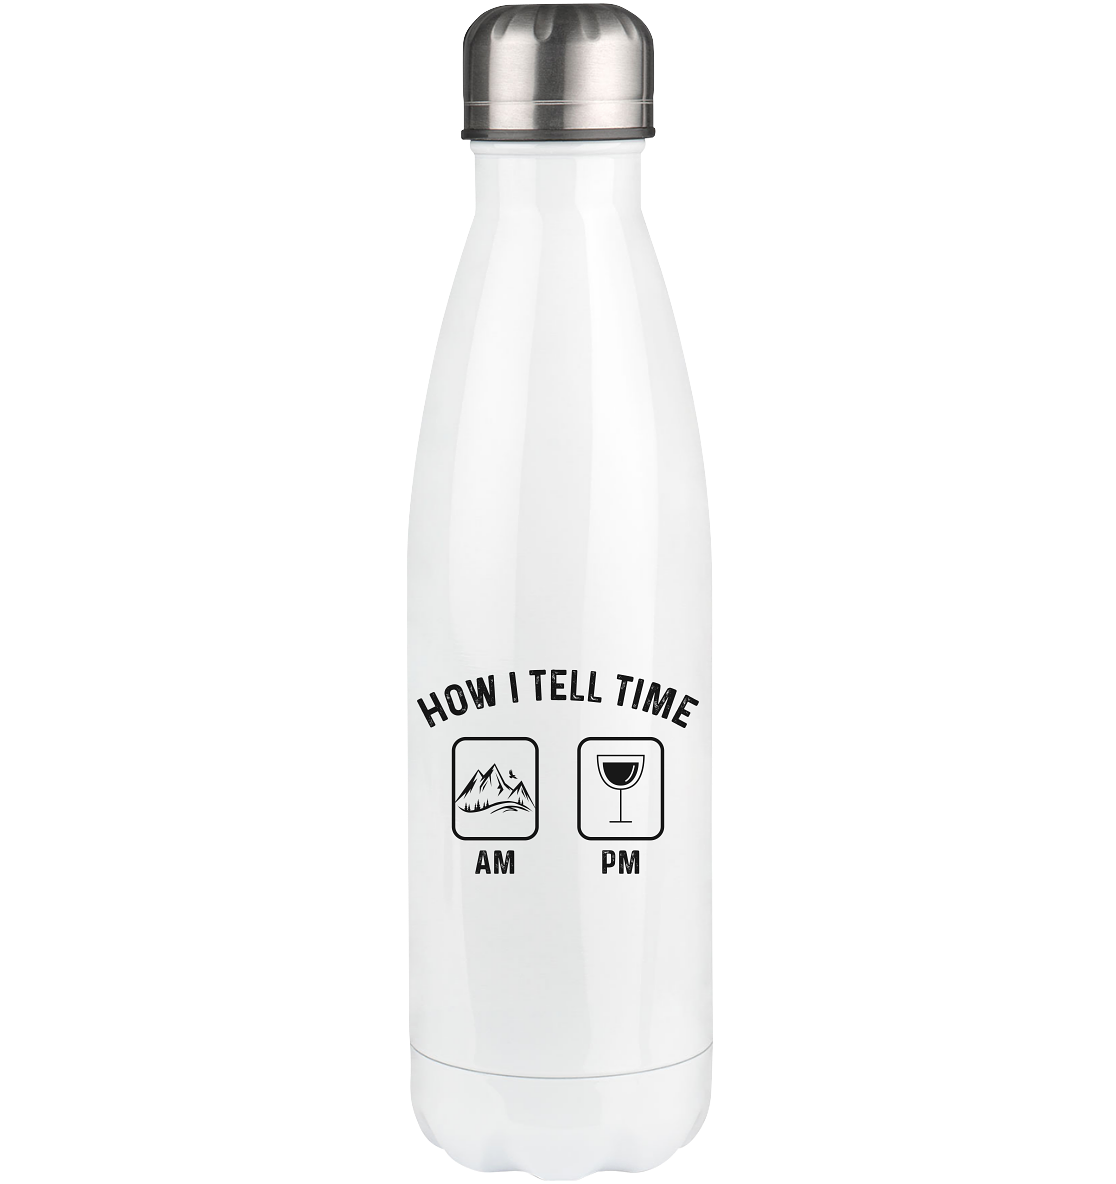 How I Tell Time Am Pm - Edelstahl Thermosflasche berge 500ml